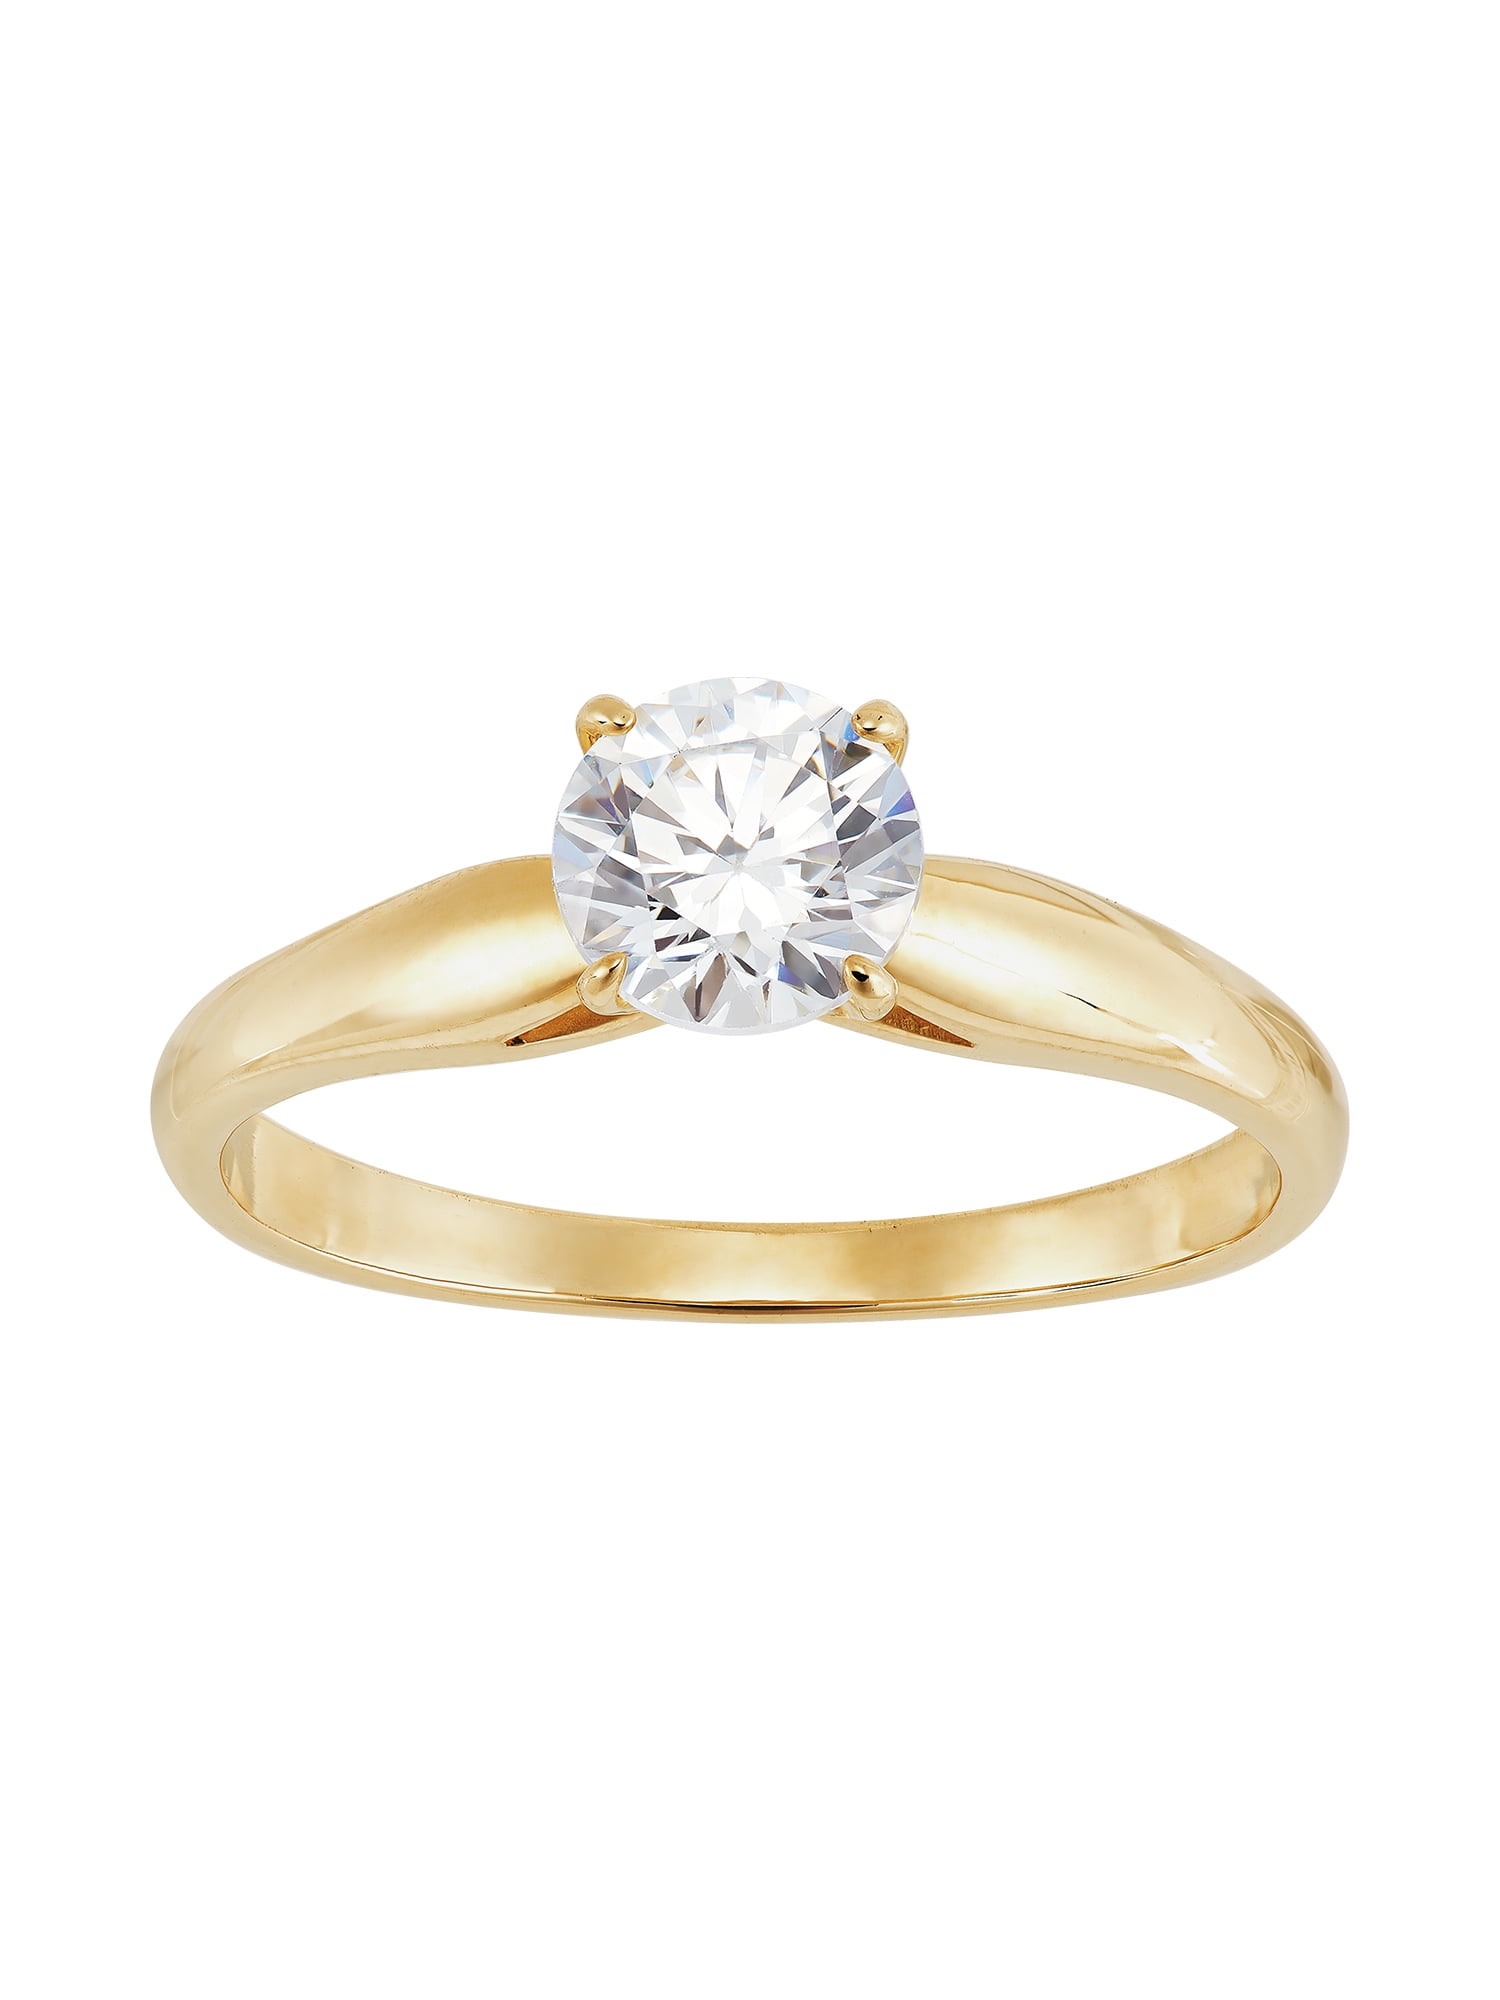 10k Yellow Gold CZ Princess Cut Solitaire Engagement Ring 